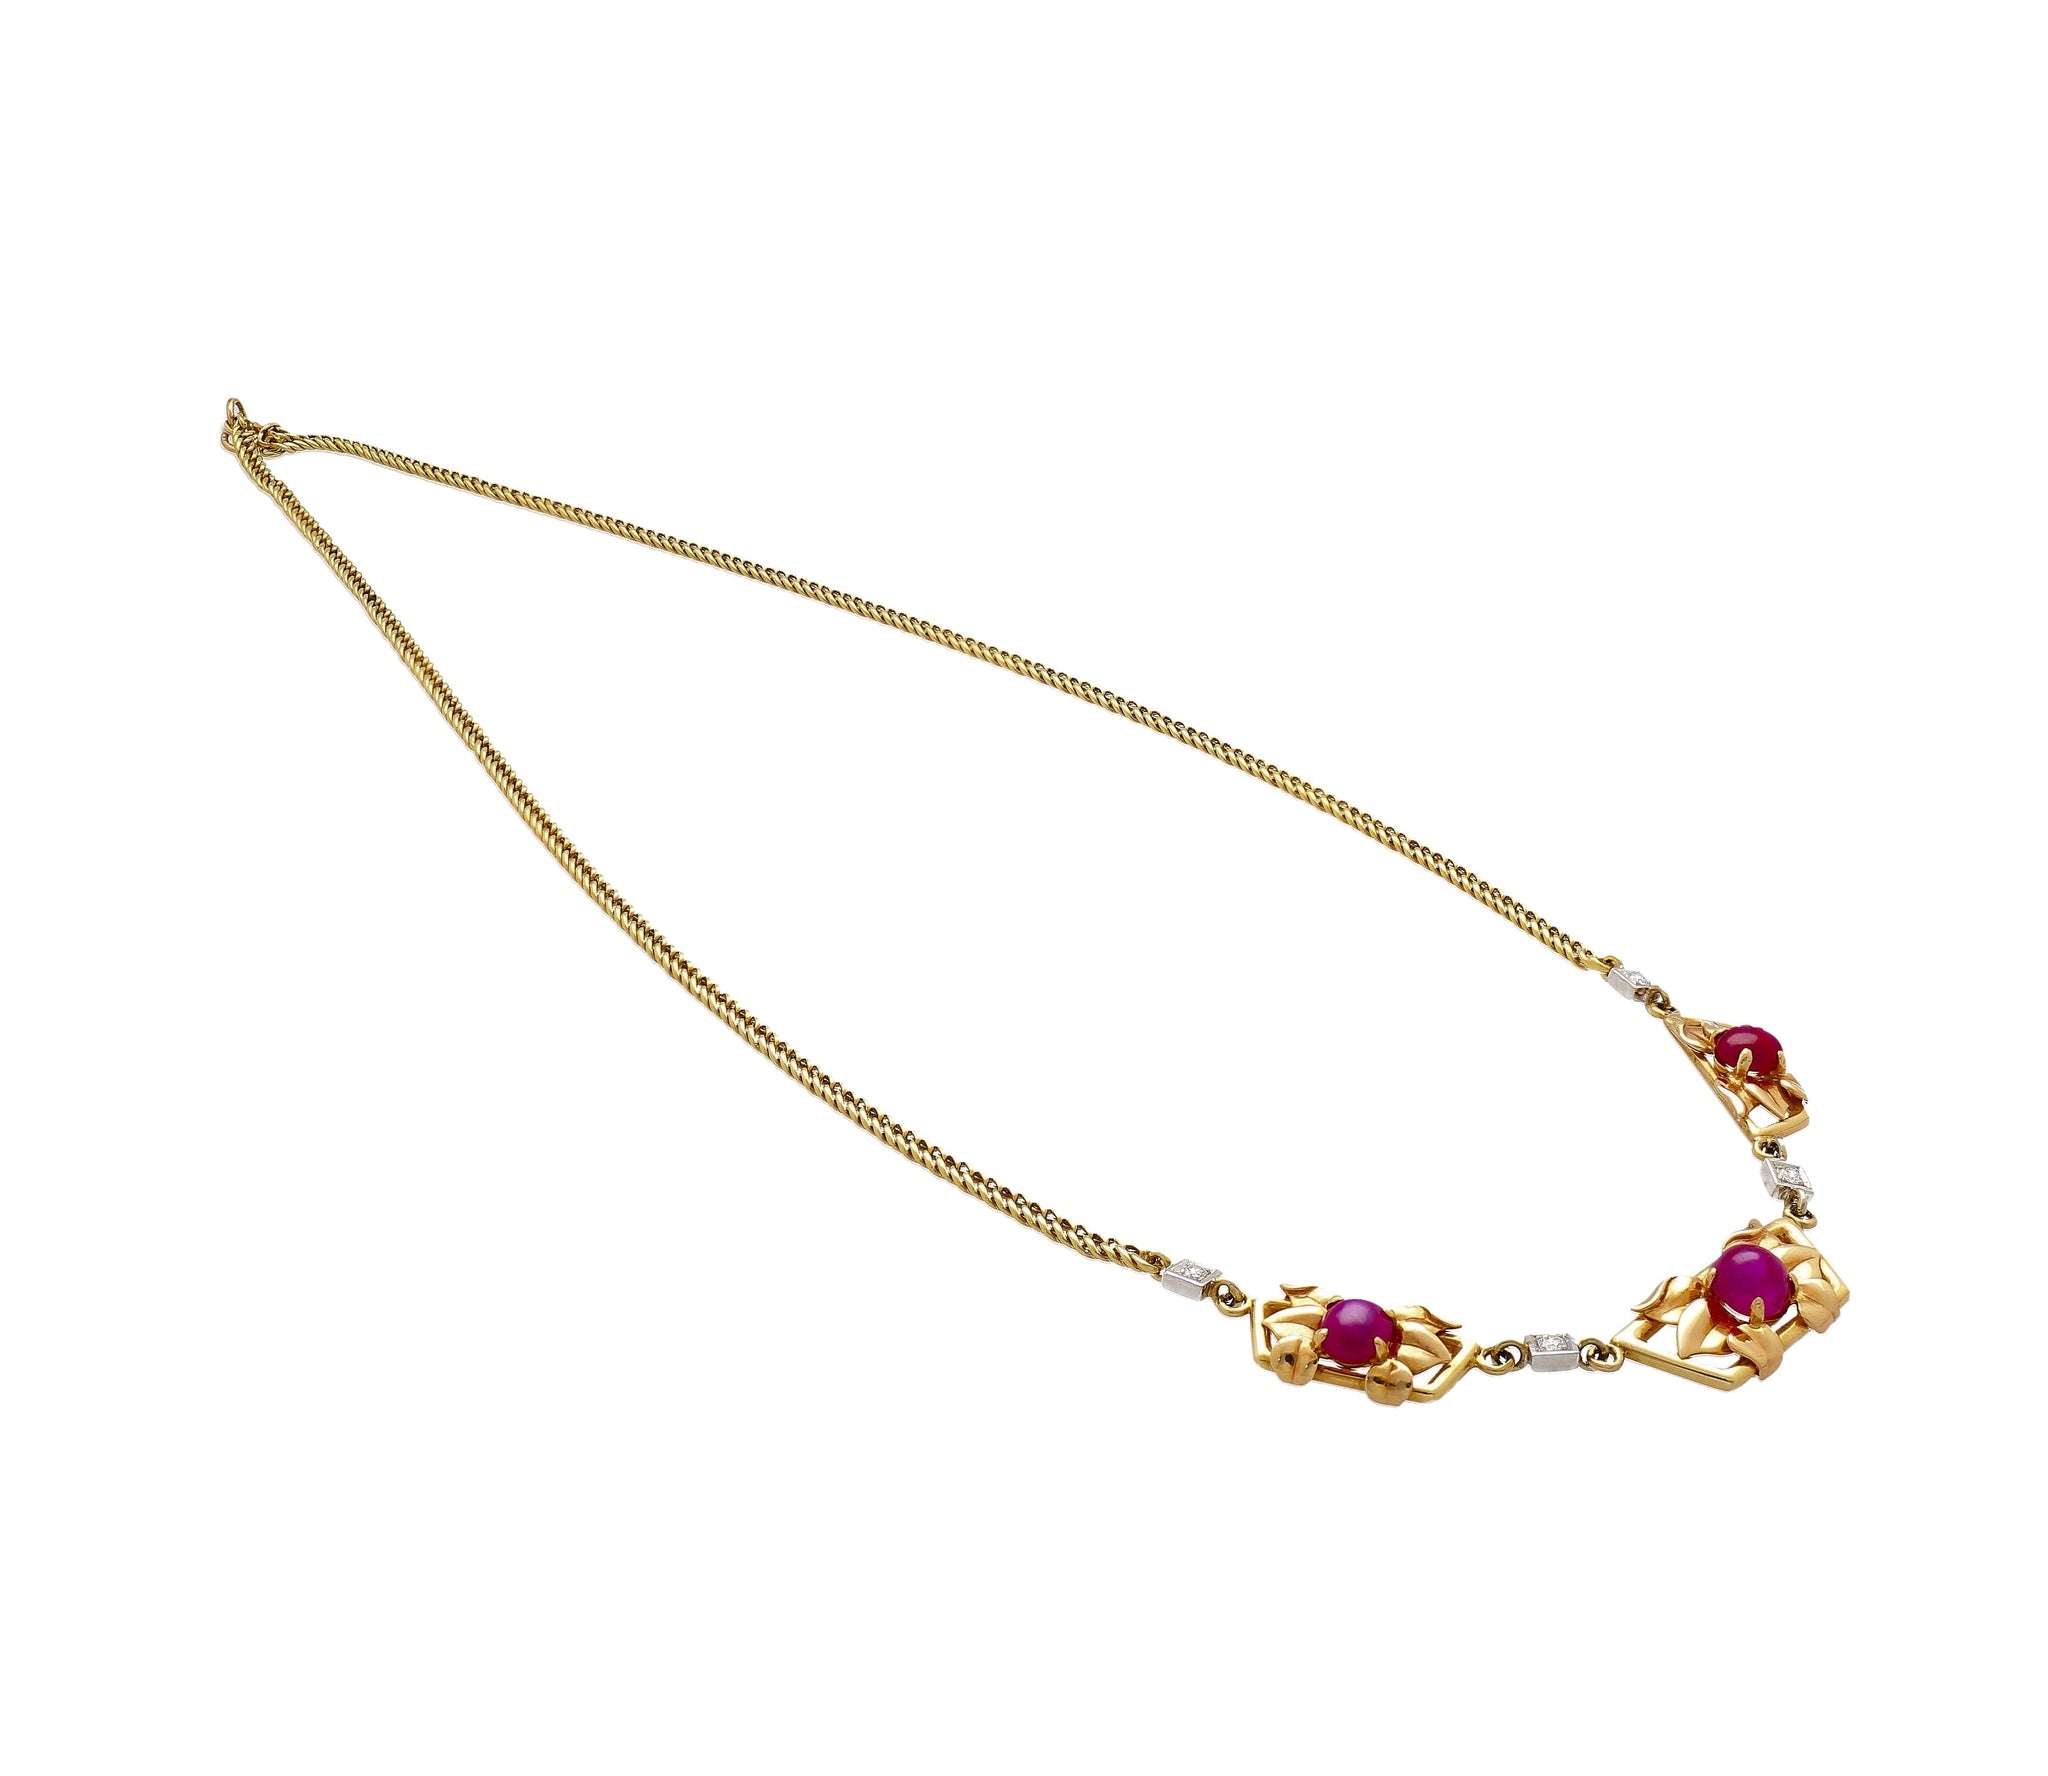 Vintage Retro Era 6.22 Carat Star-Ruby & Diamond Necklace with 14K Gold Carved Detailing